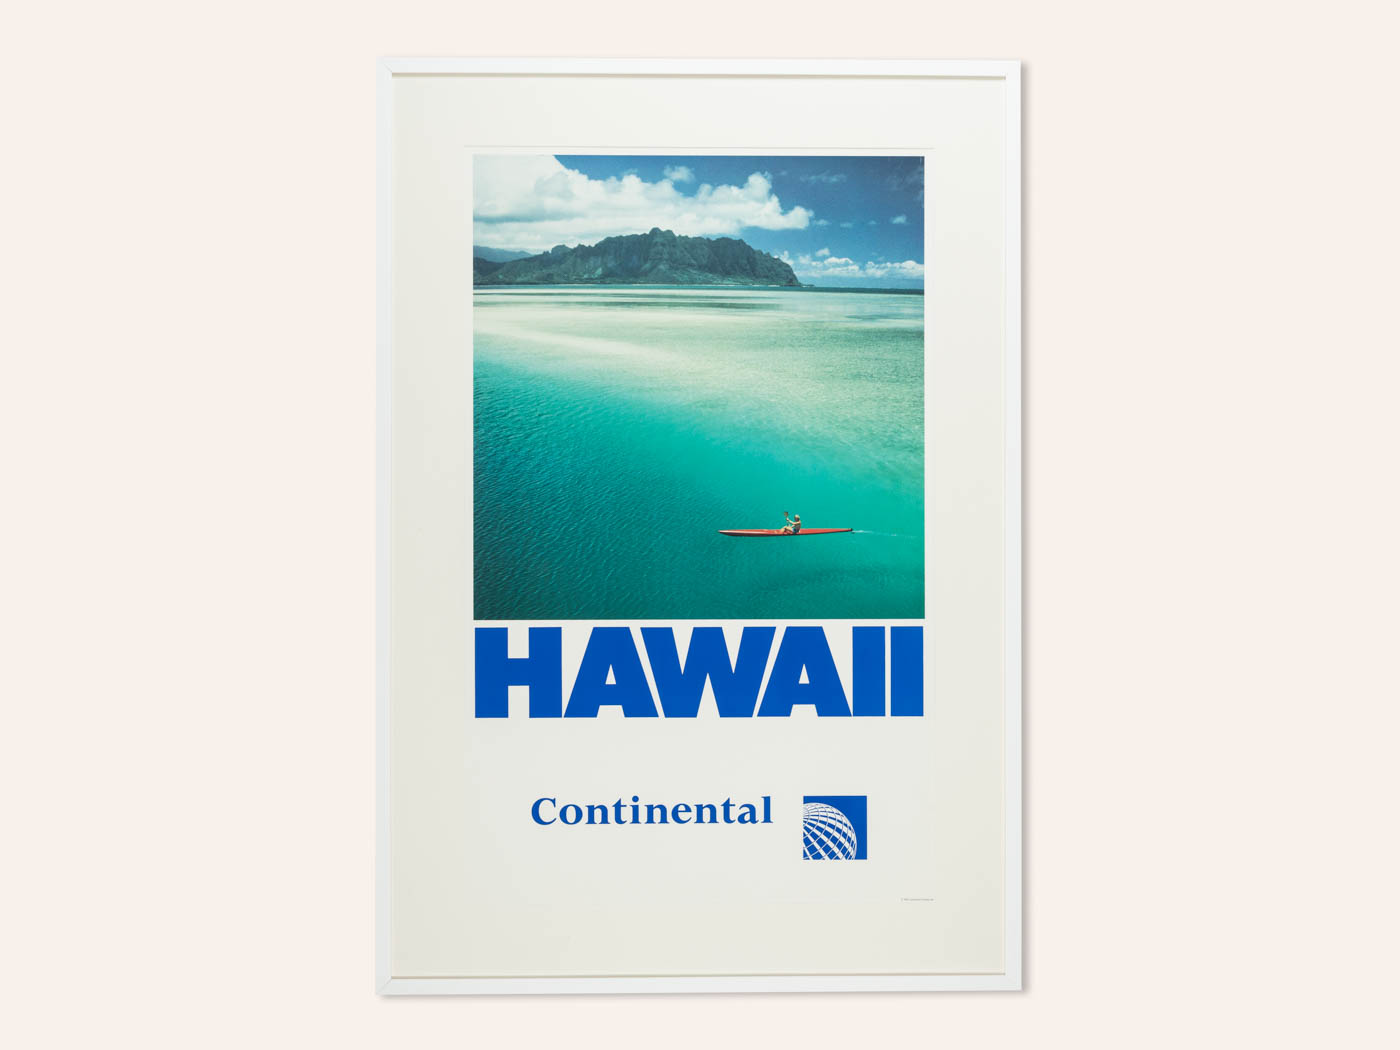 HAWAII, CONTINENTAL AIRLINES REISEPOSTER, 85 X 123 CM